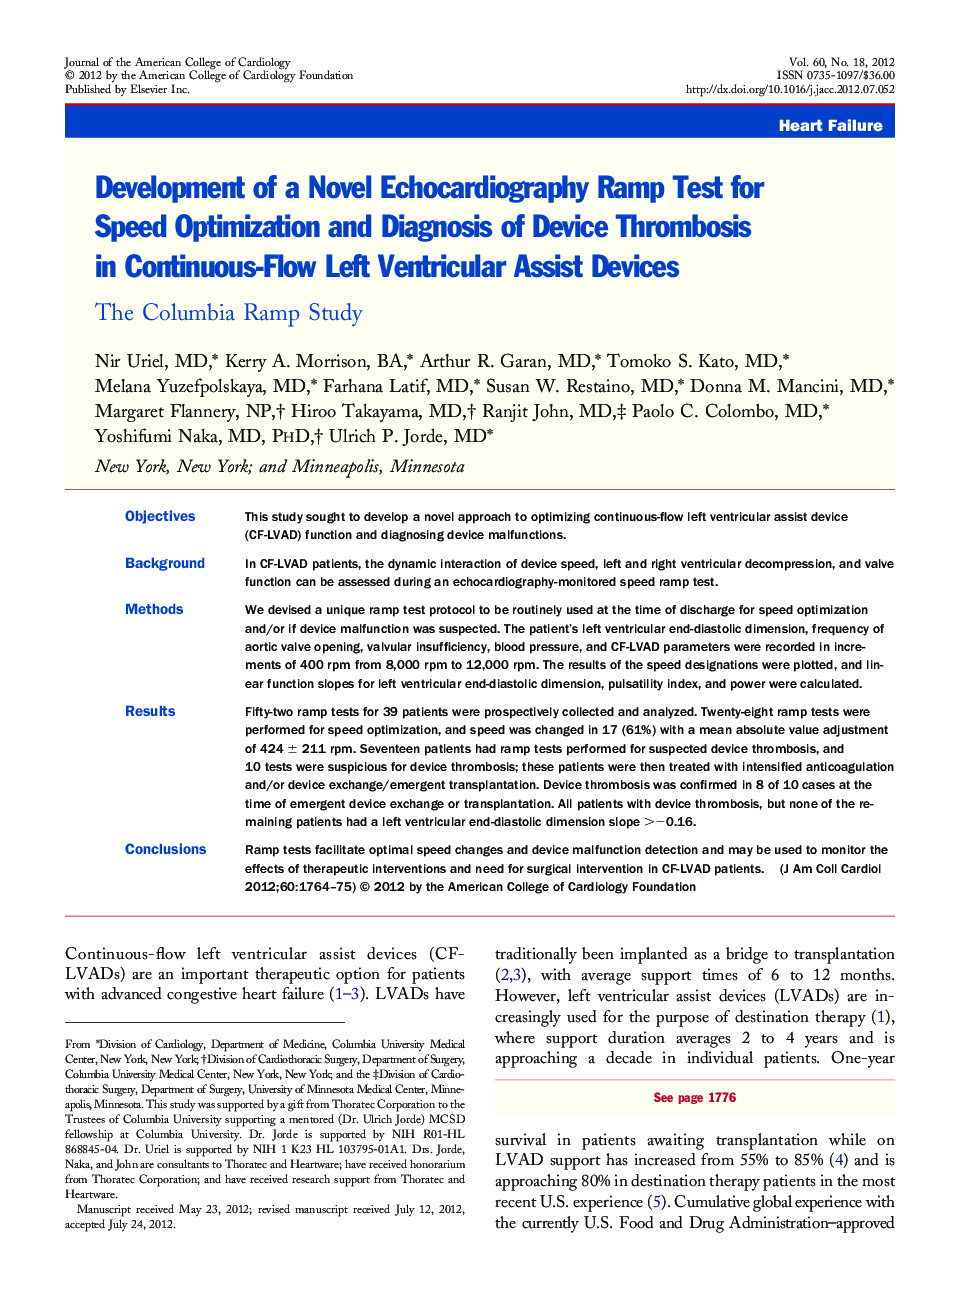 Development of a Novel Echocardiography Ramp Test for Speed Optimization and Diagnosis of Device Thrombosis in Continuous-Flow Left Ventricular Assist Devices : The Columbia Ramp Study